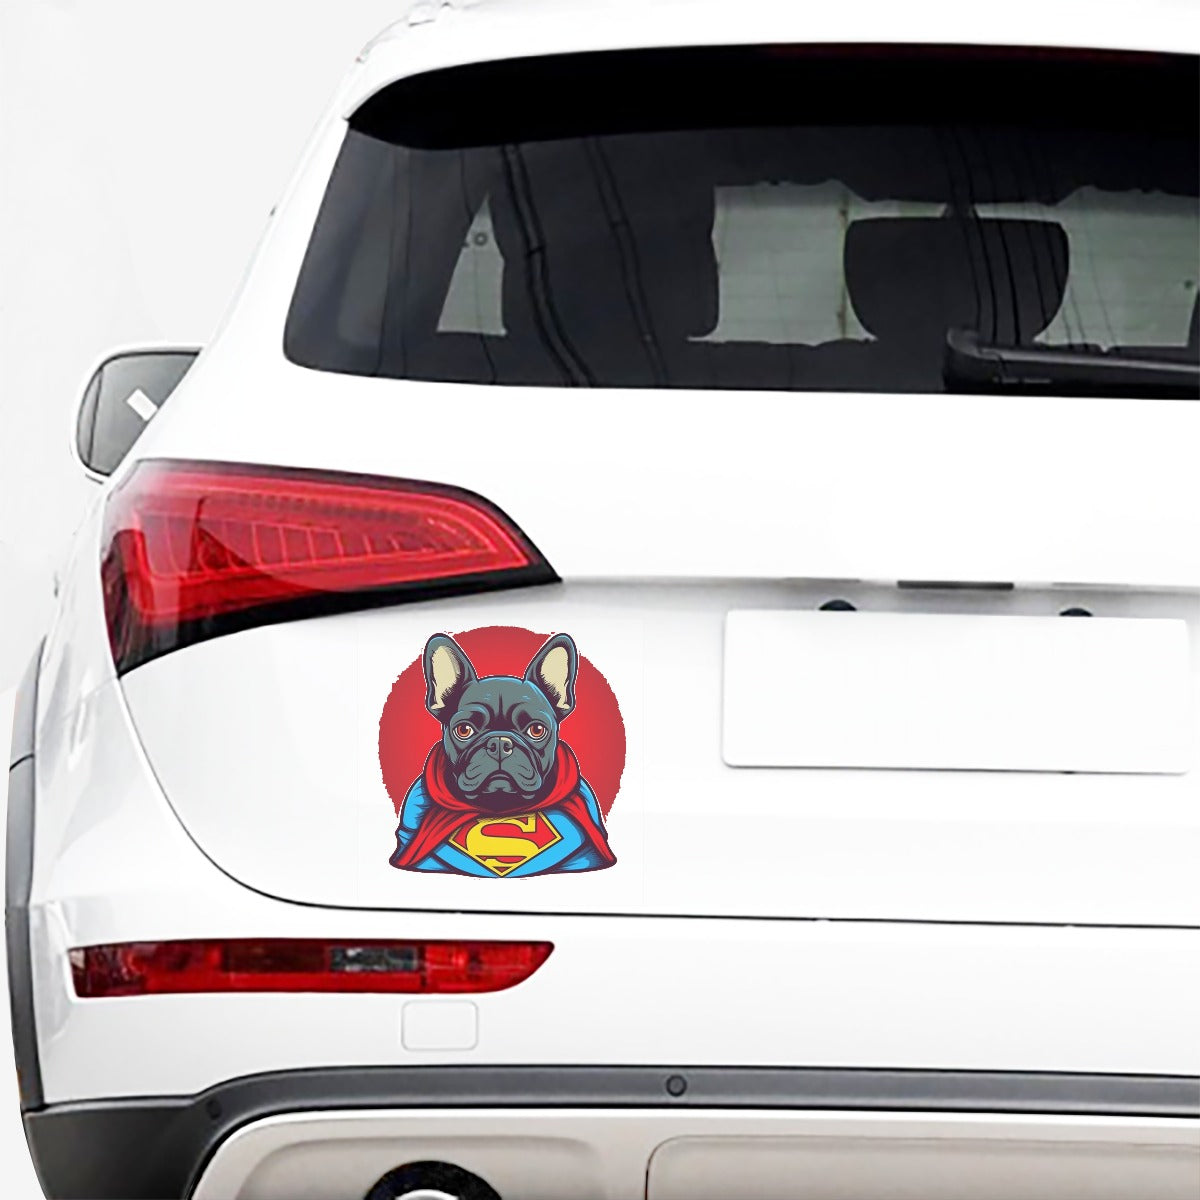 Adorable French Bulldog Car Decal – Perfect Gift for Dog Lovers